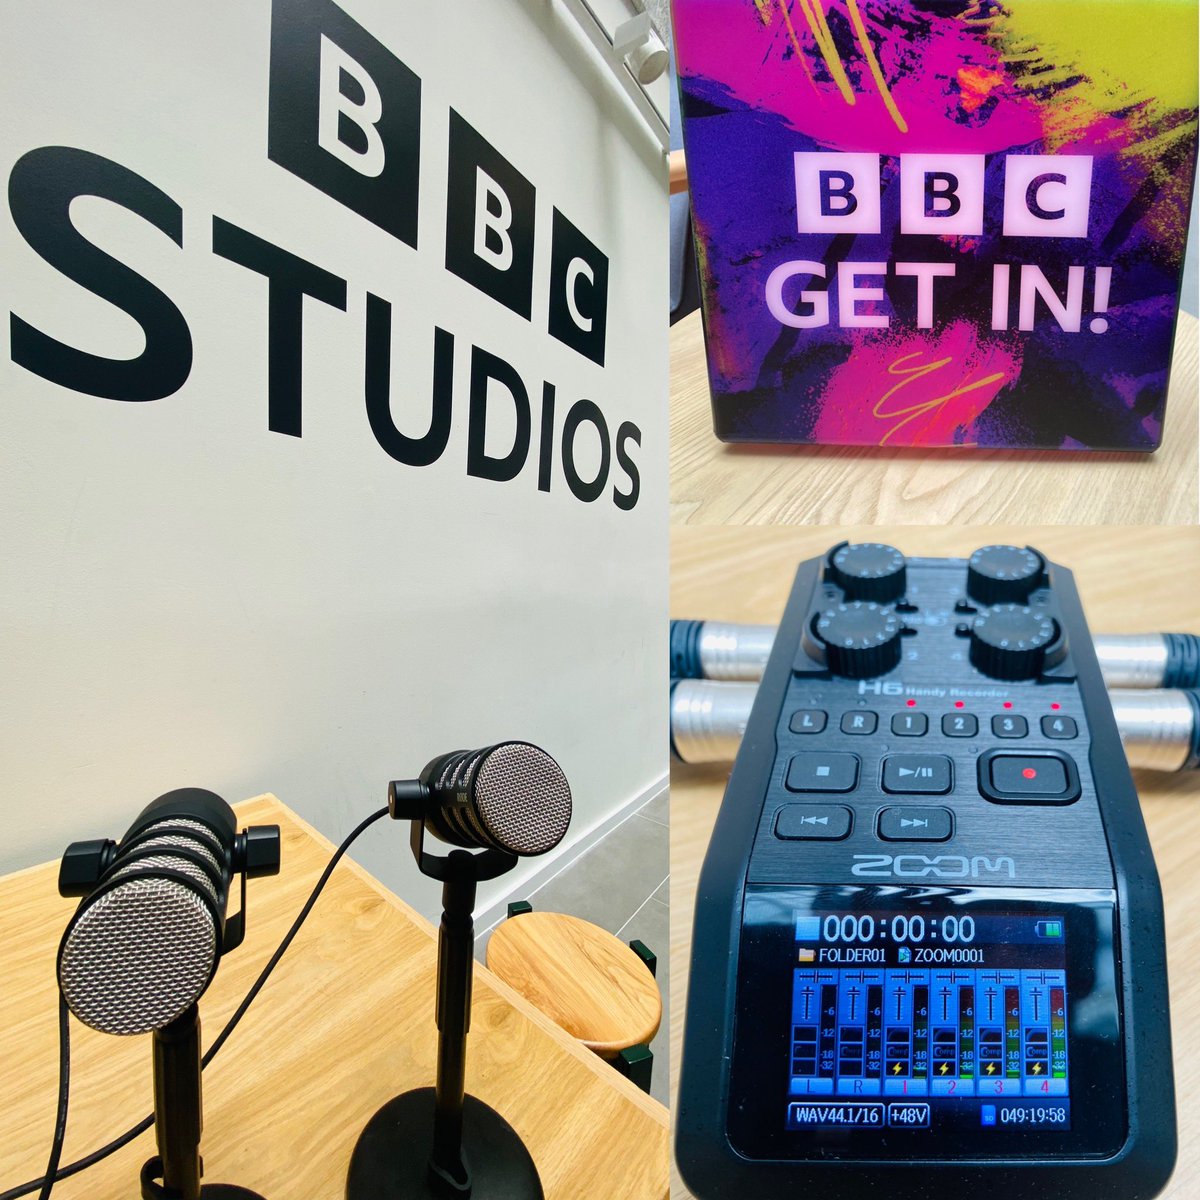 Podcast training in Bristol today #bbcgetin #storytelling #whatsyourstory